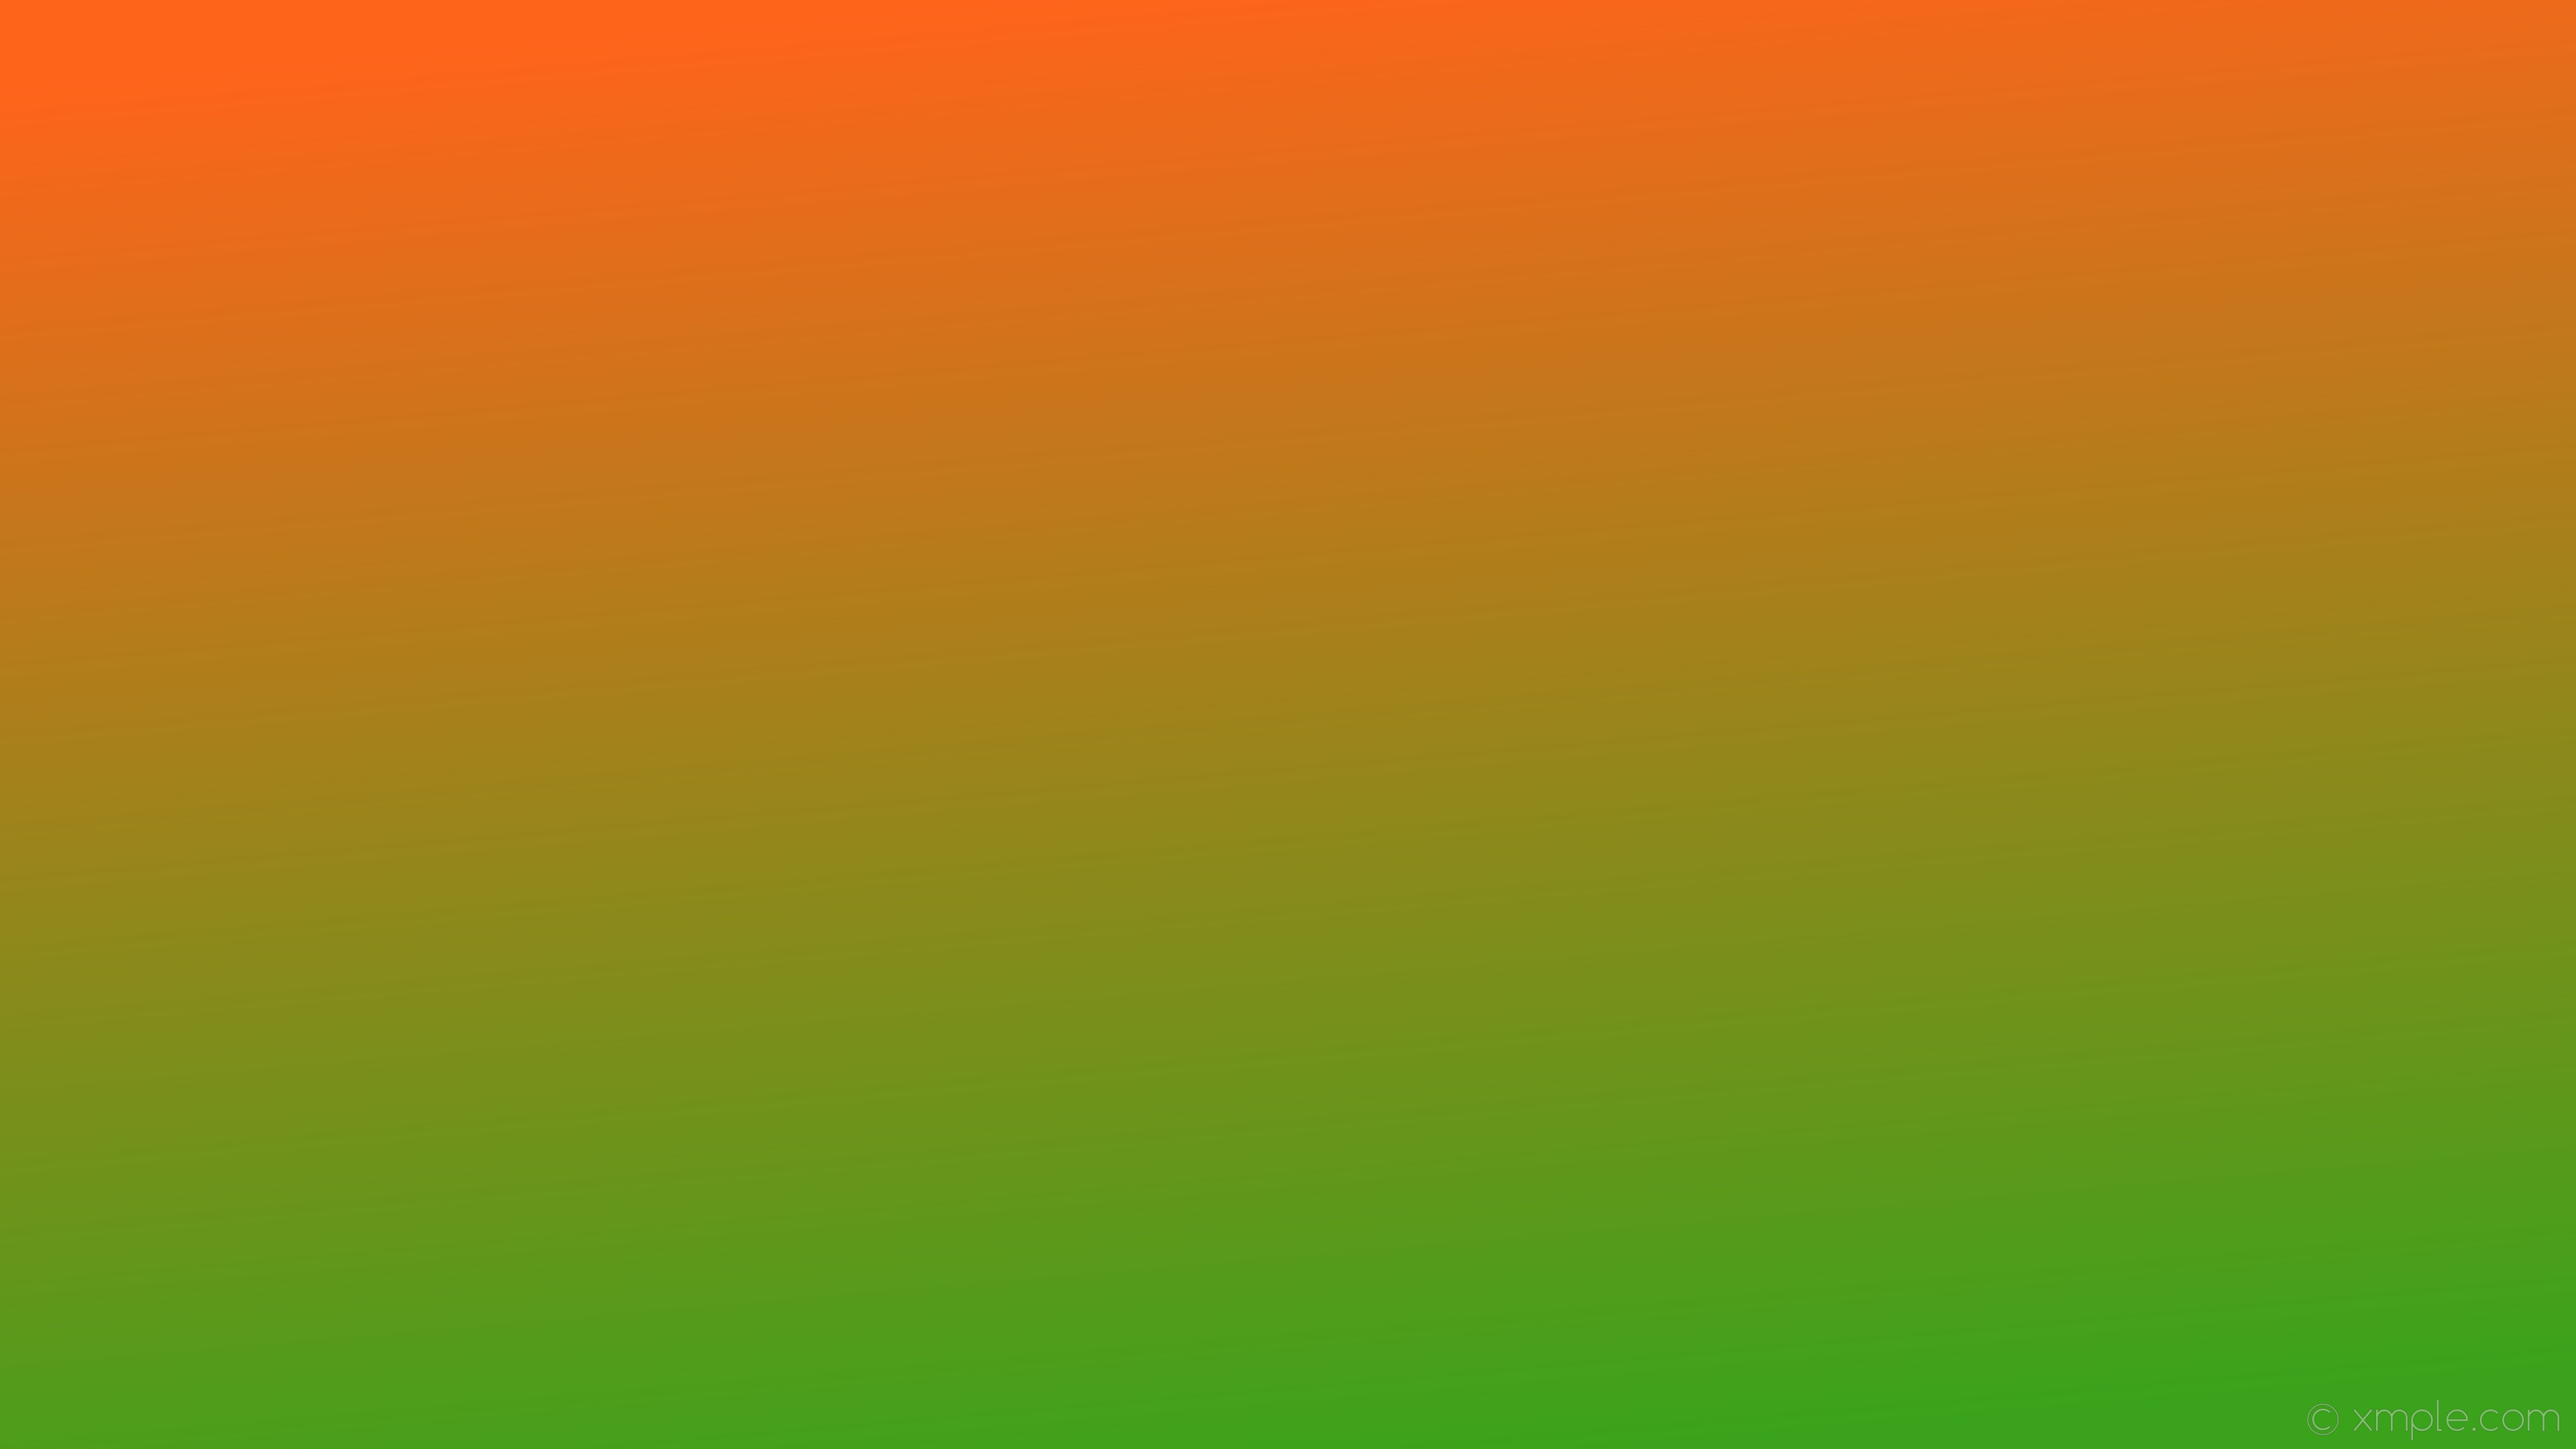 Orange and Green Wallpaper (60+ images)